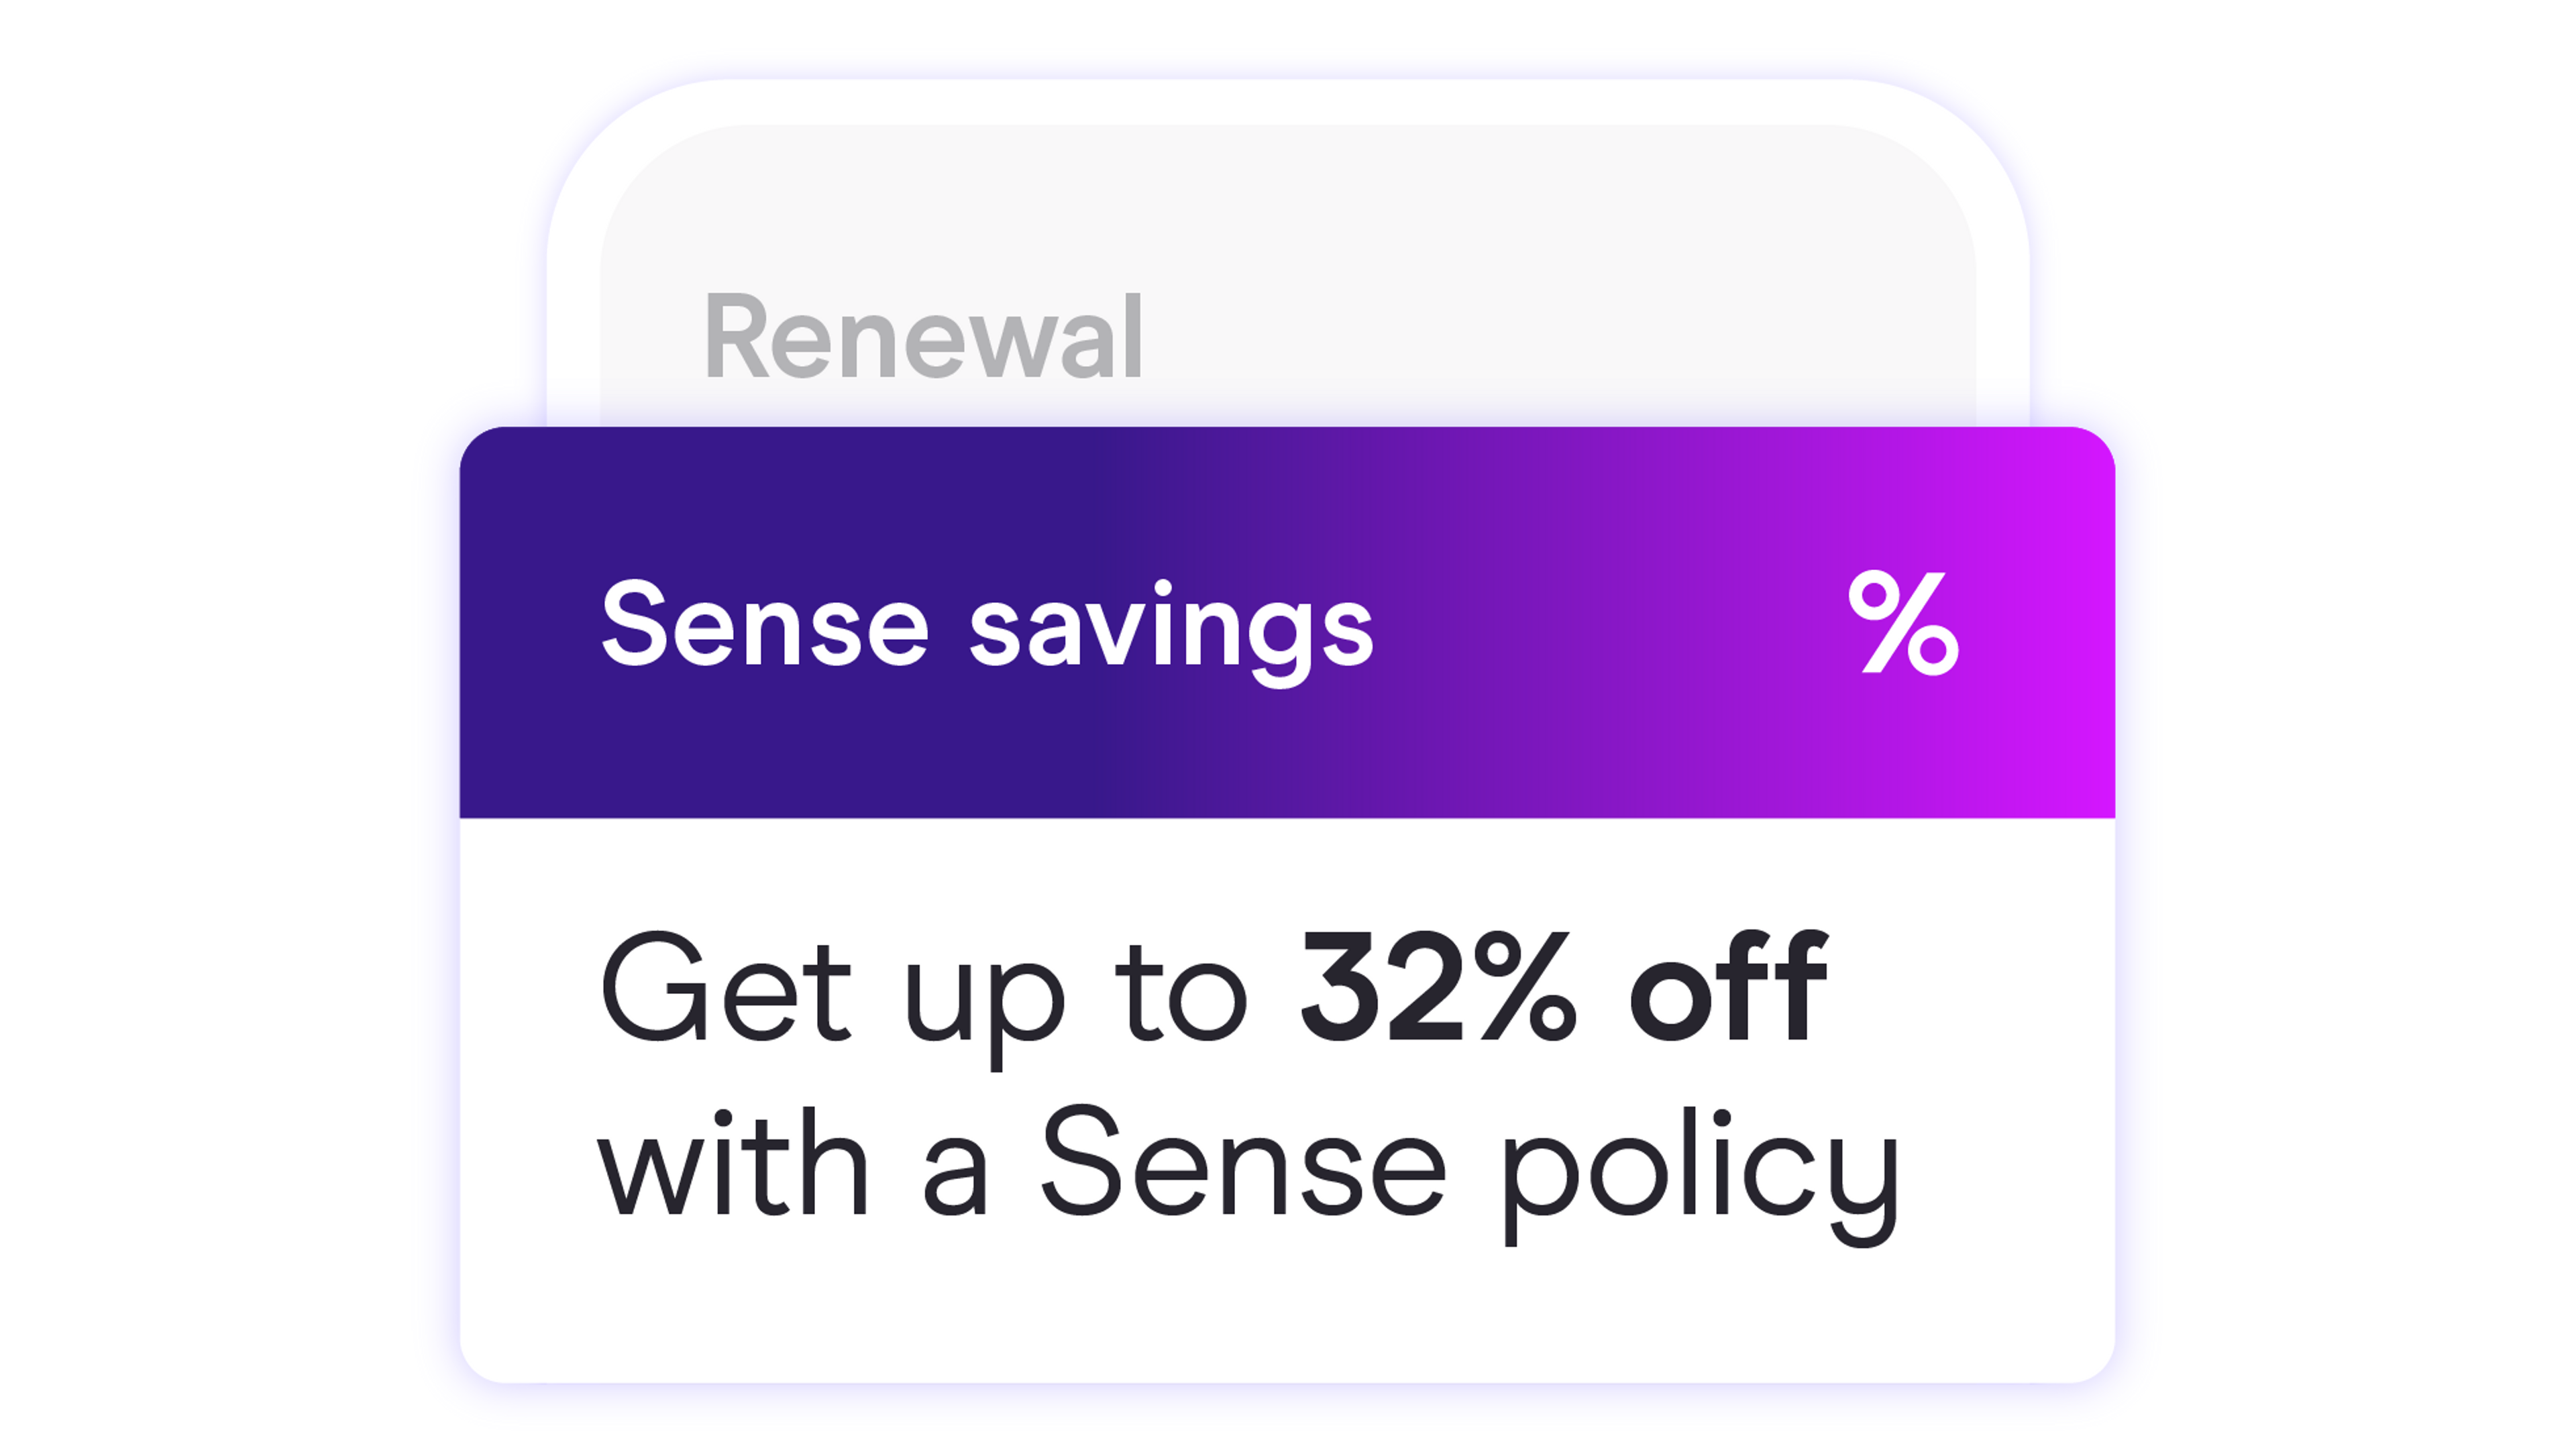 Sense app showing renewal pop up with 32% discount